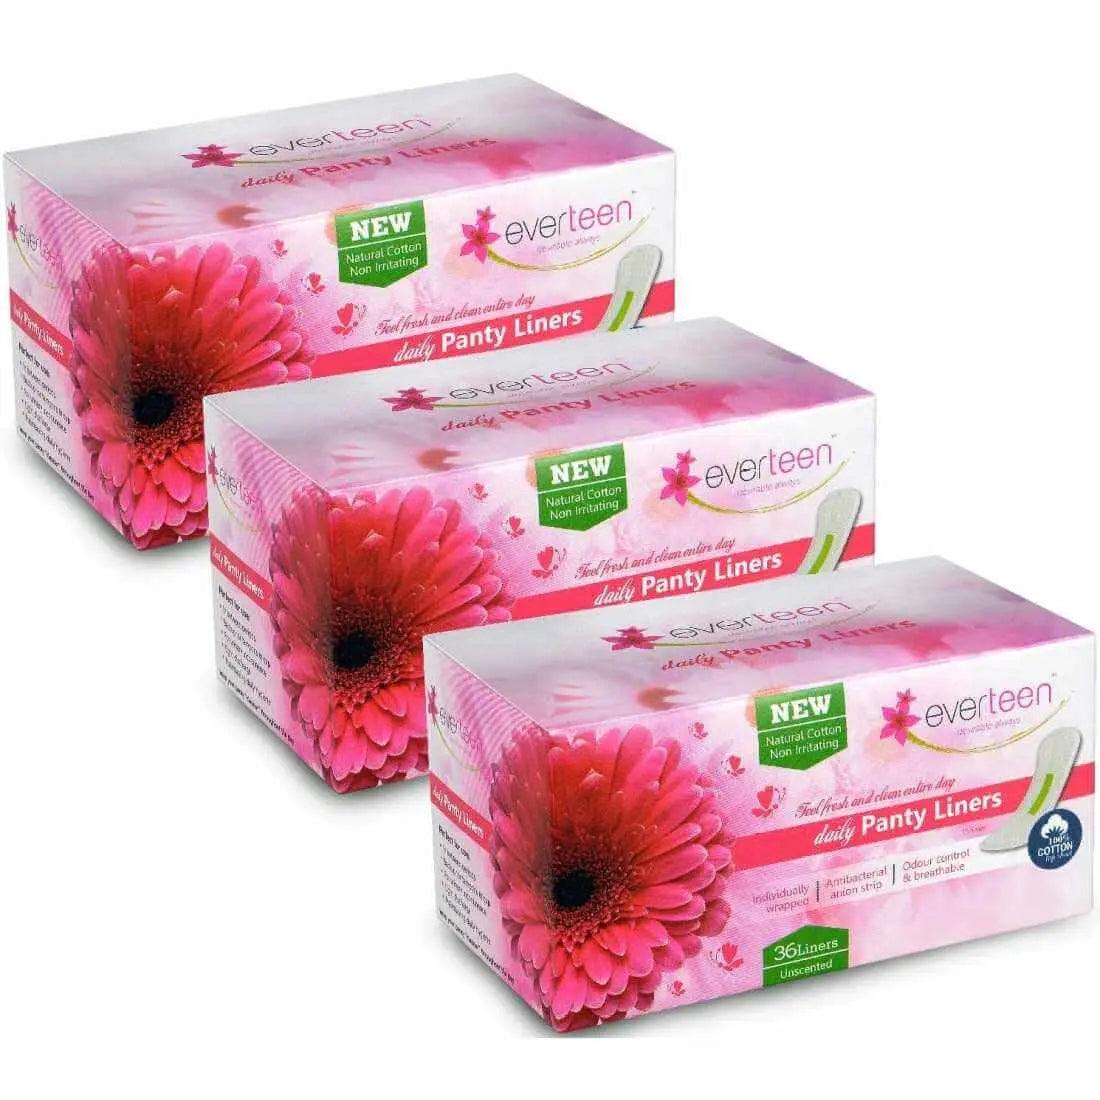 everteen Natural Cotton Daily Panty Liners for Women 8908003648323